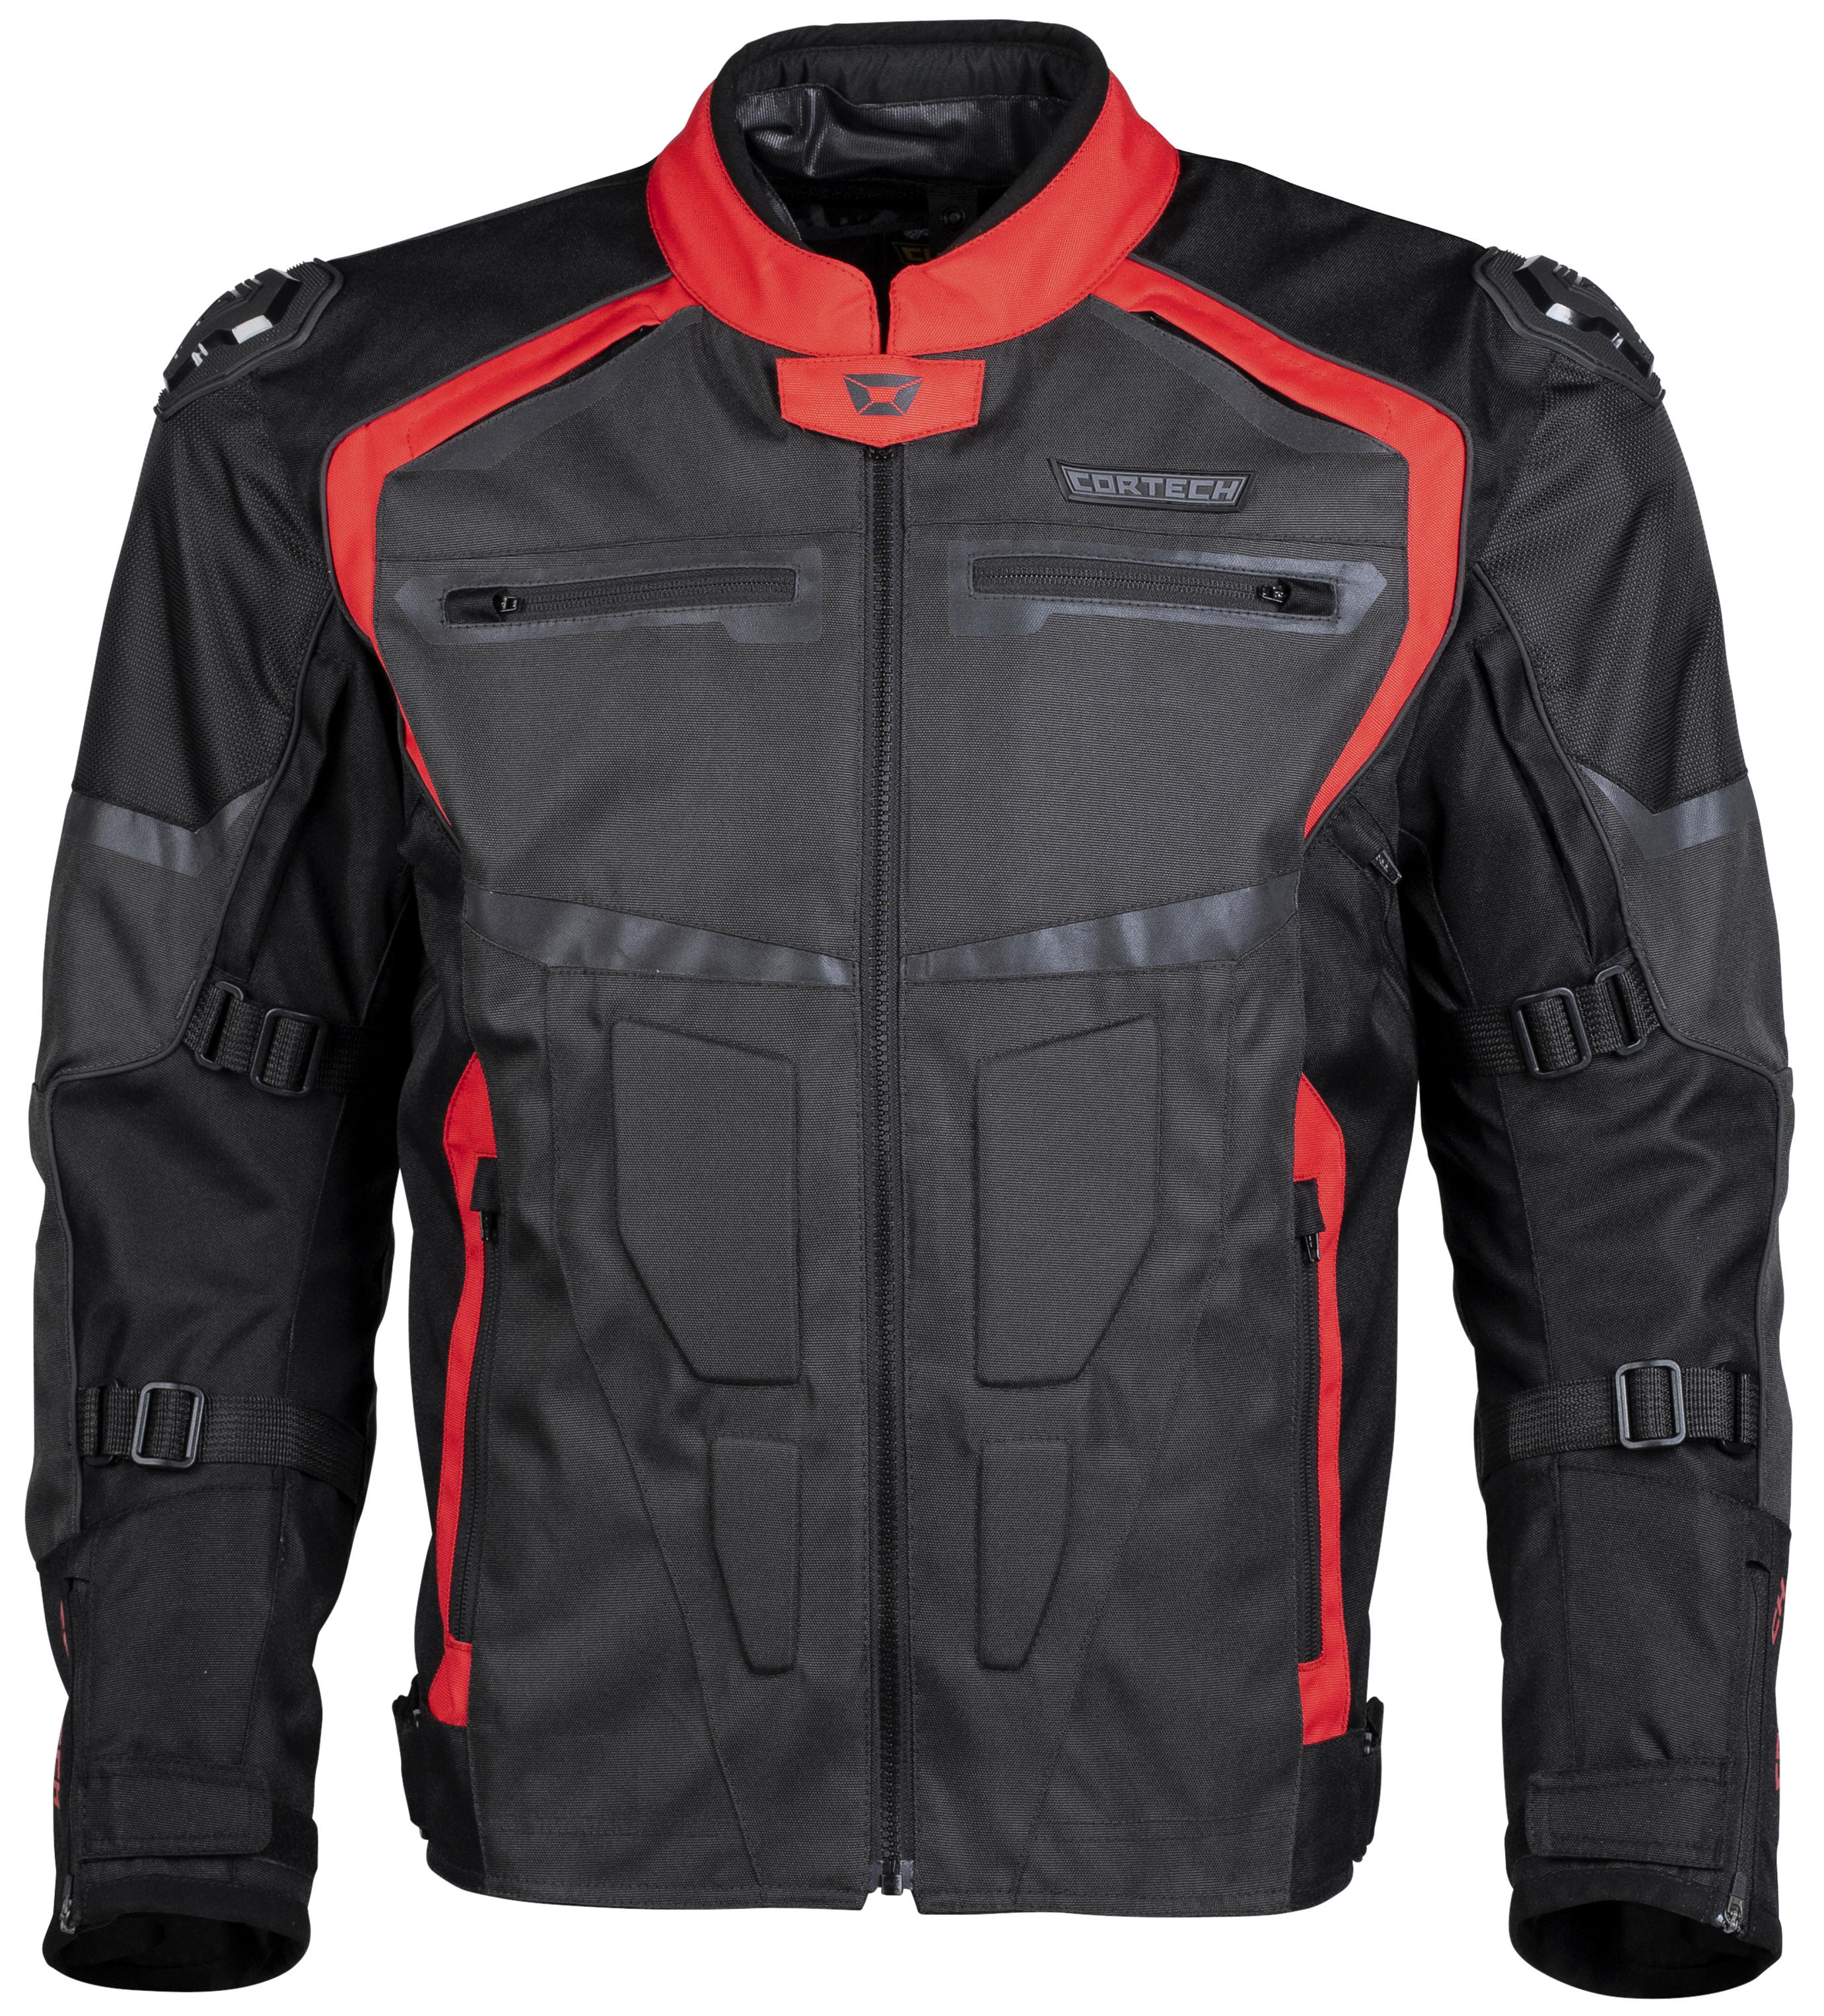 Hyper-Tec Armored Motorcycle Riding Jacket Red/Gunmetal Small - Click Image to Close